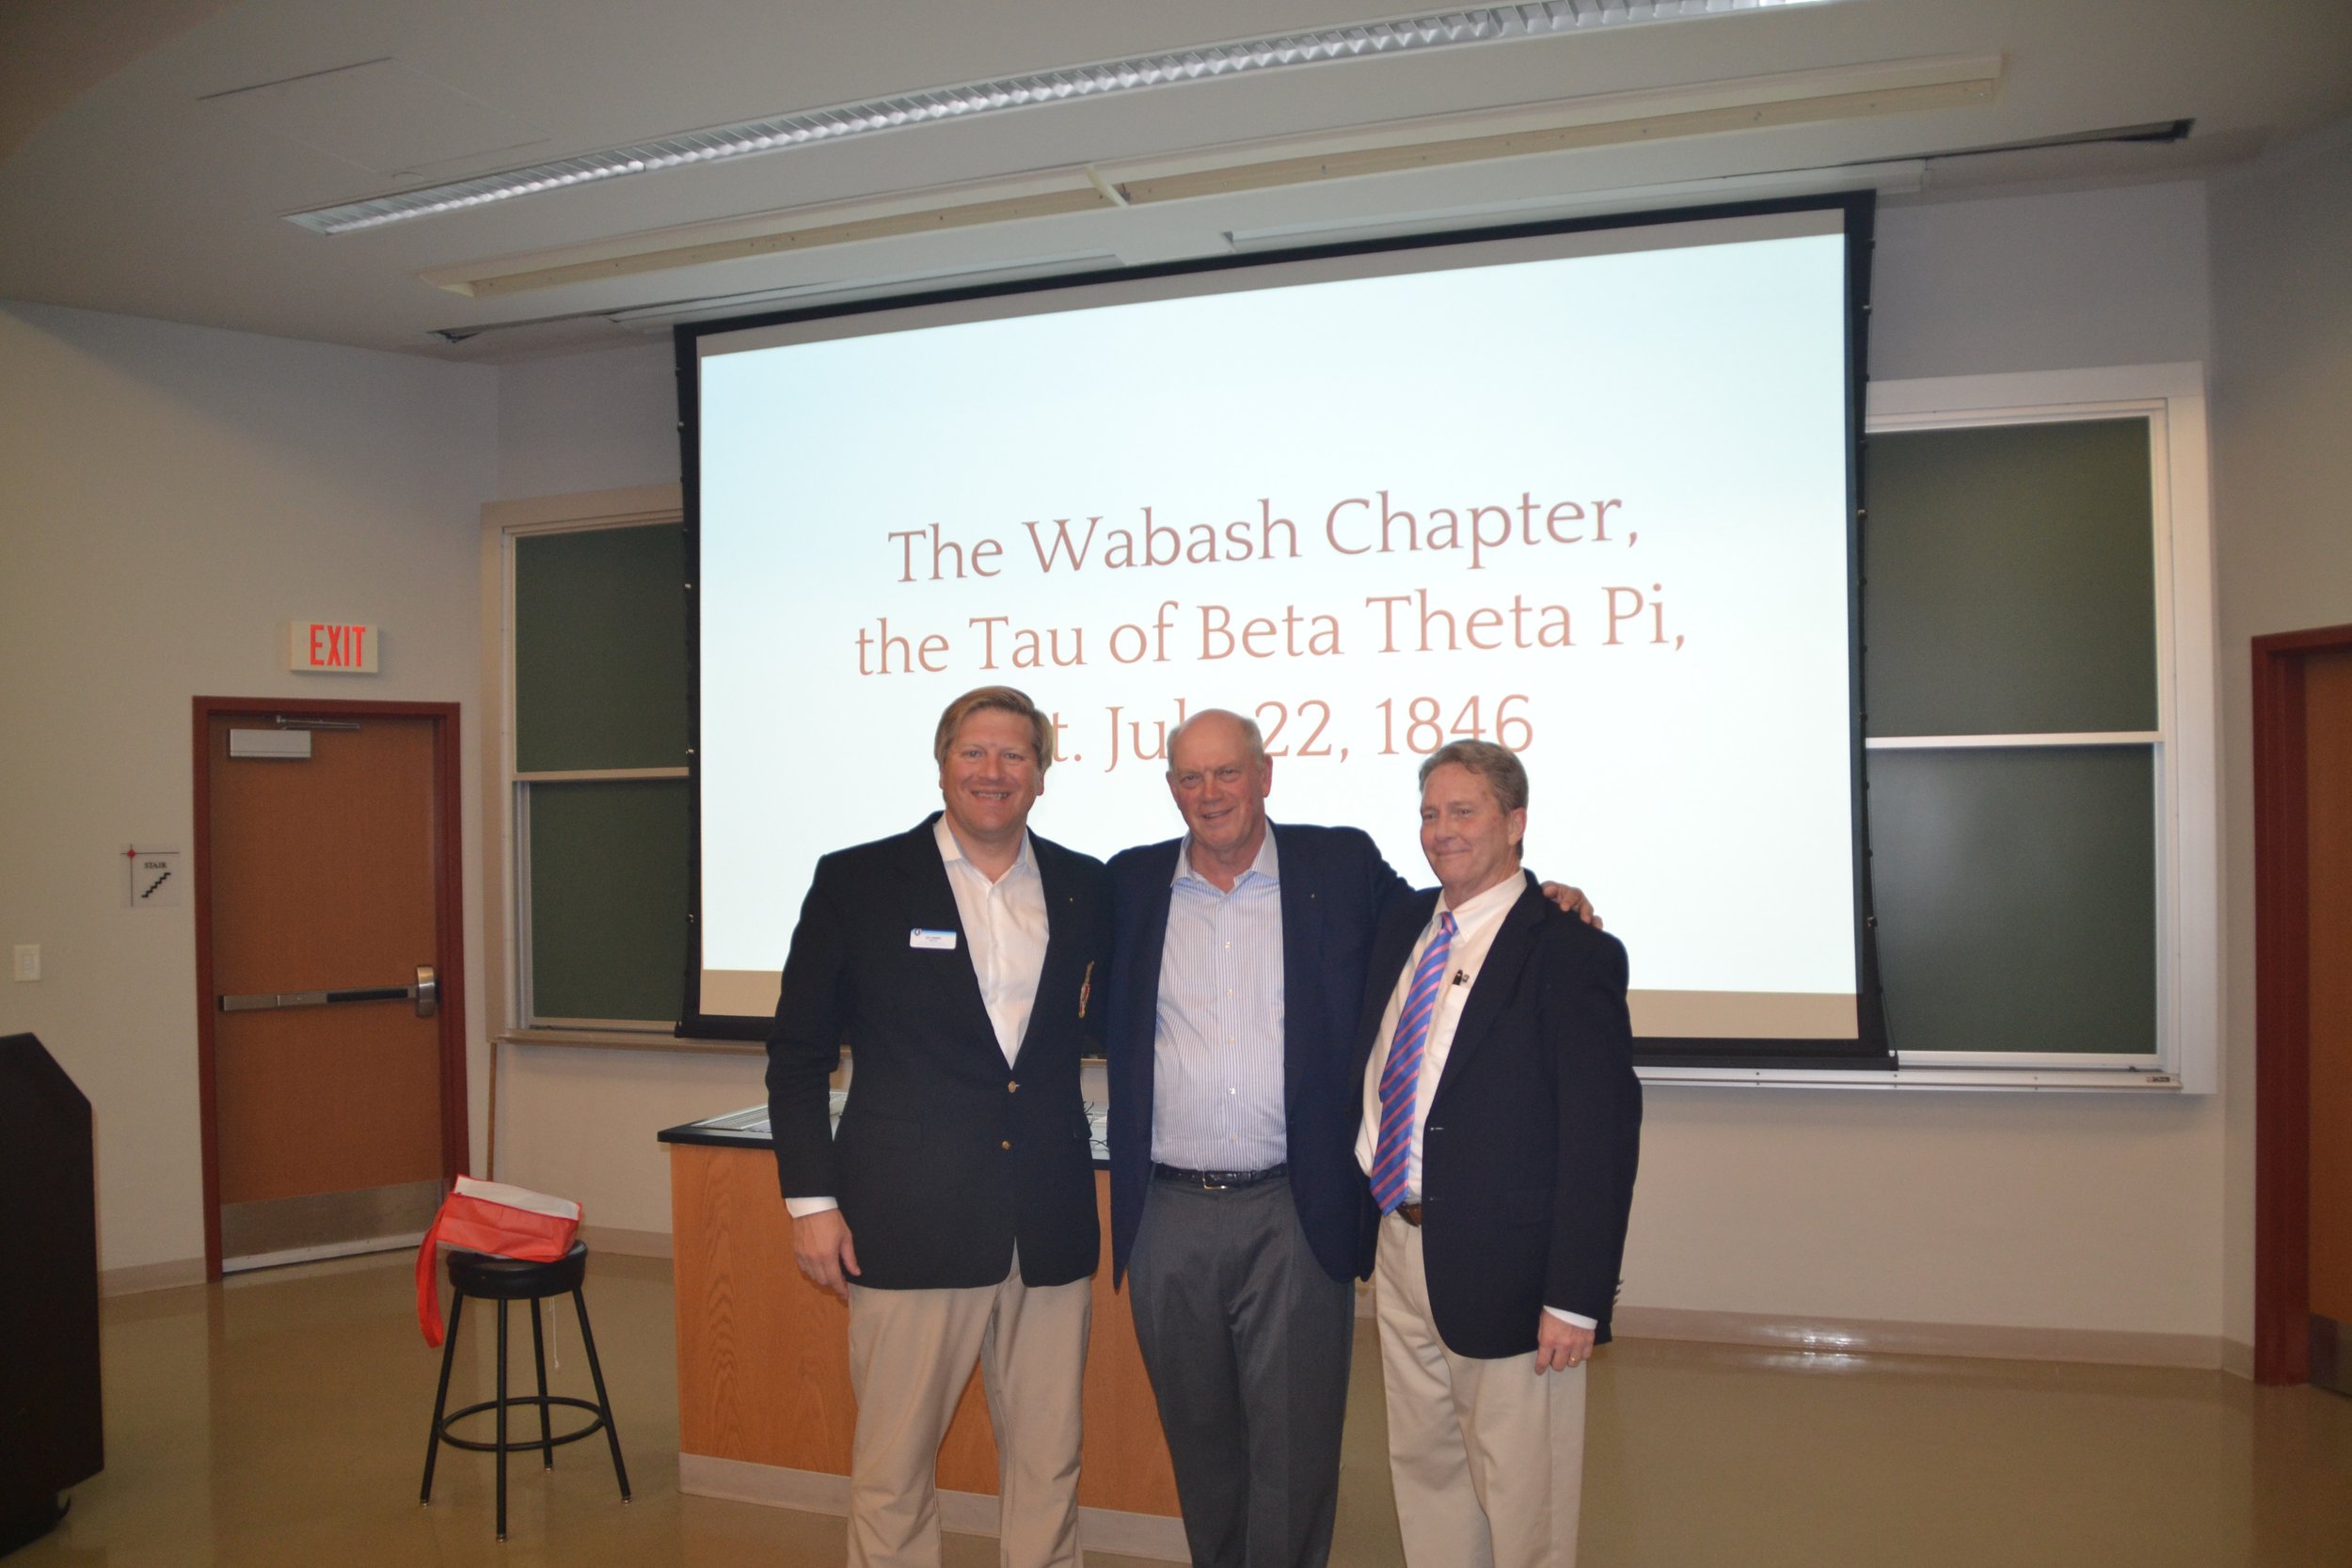  Zac Haines Miami '05, Bob Grand '78, and Jon Myers '81 gather for a photo following the history presentation. 